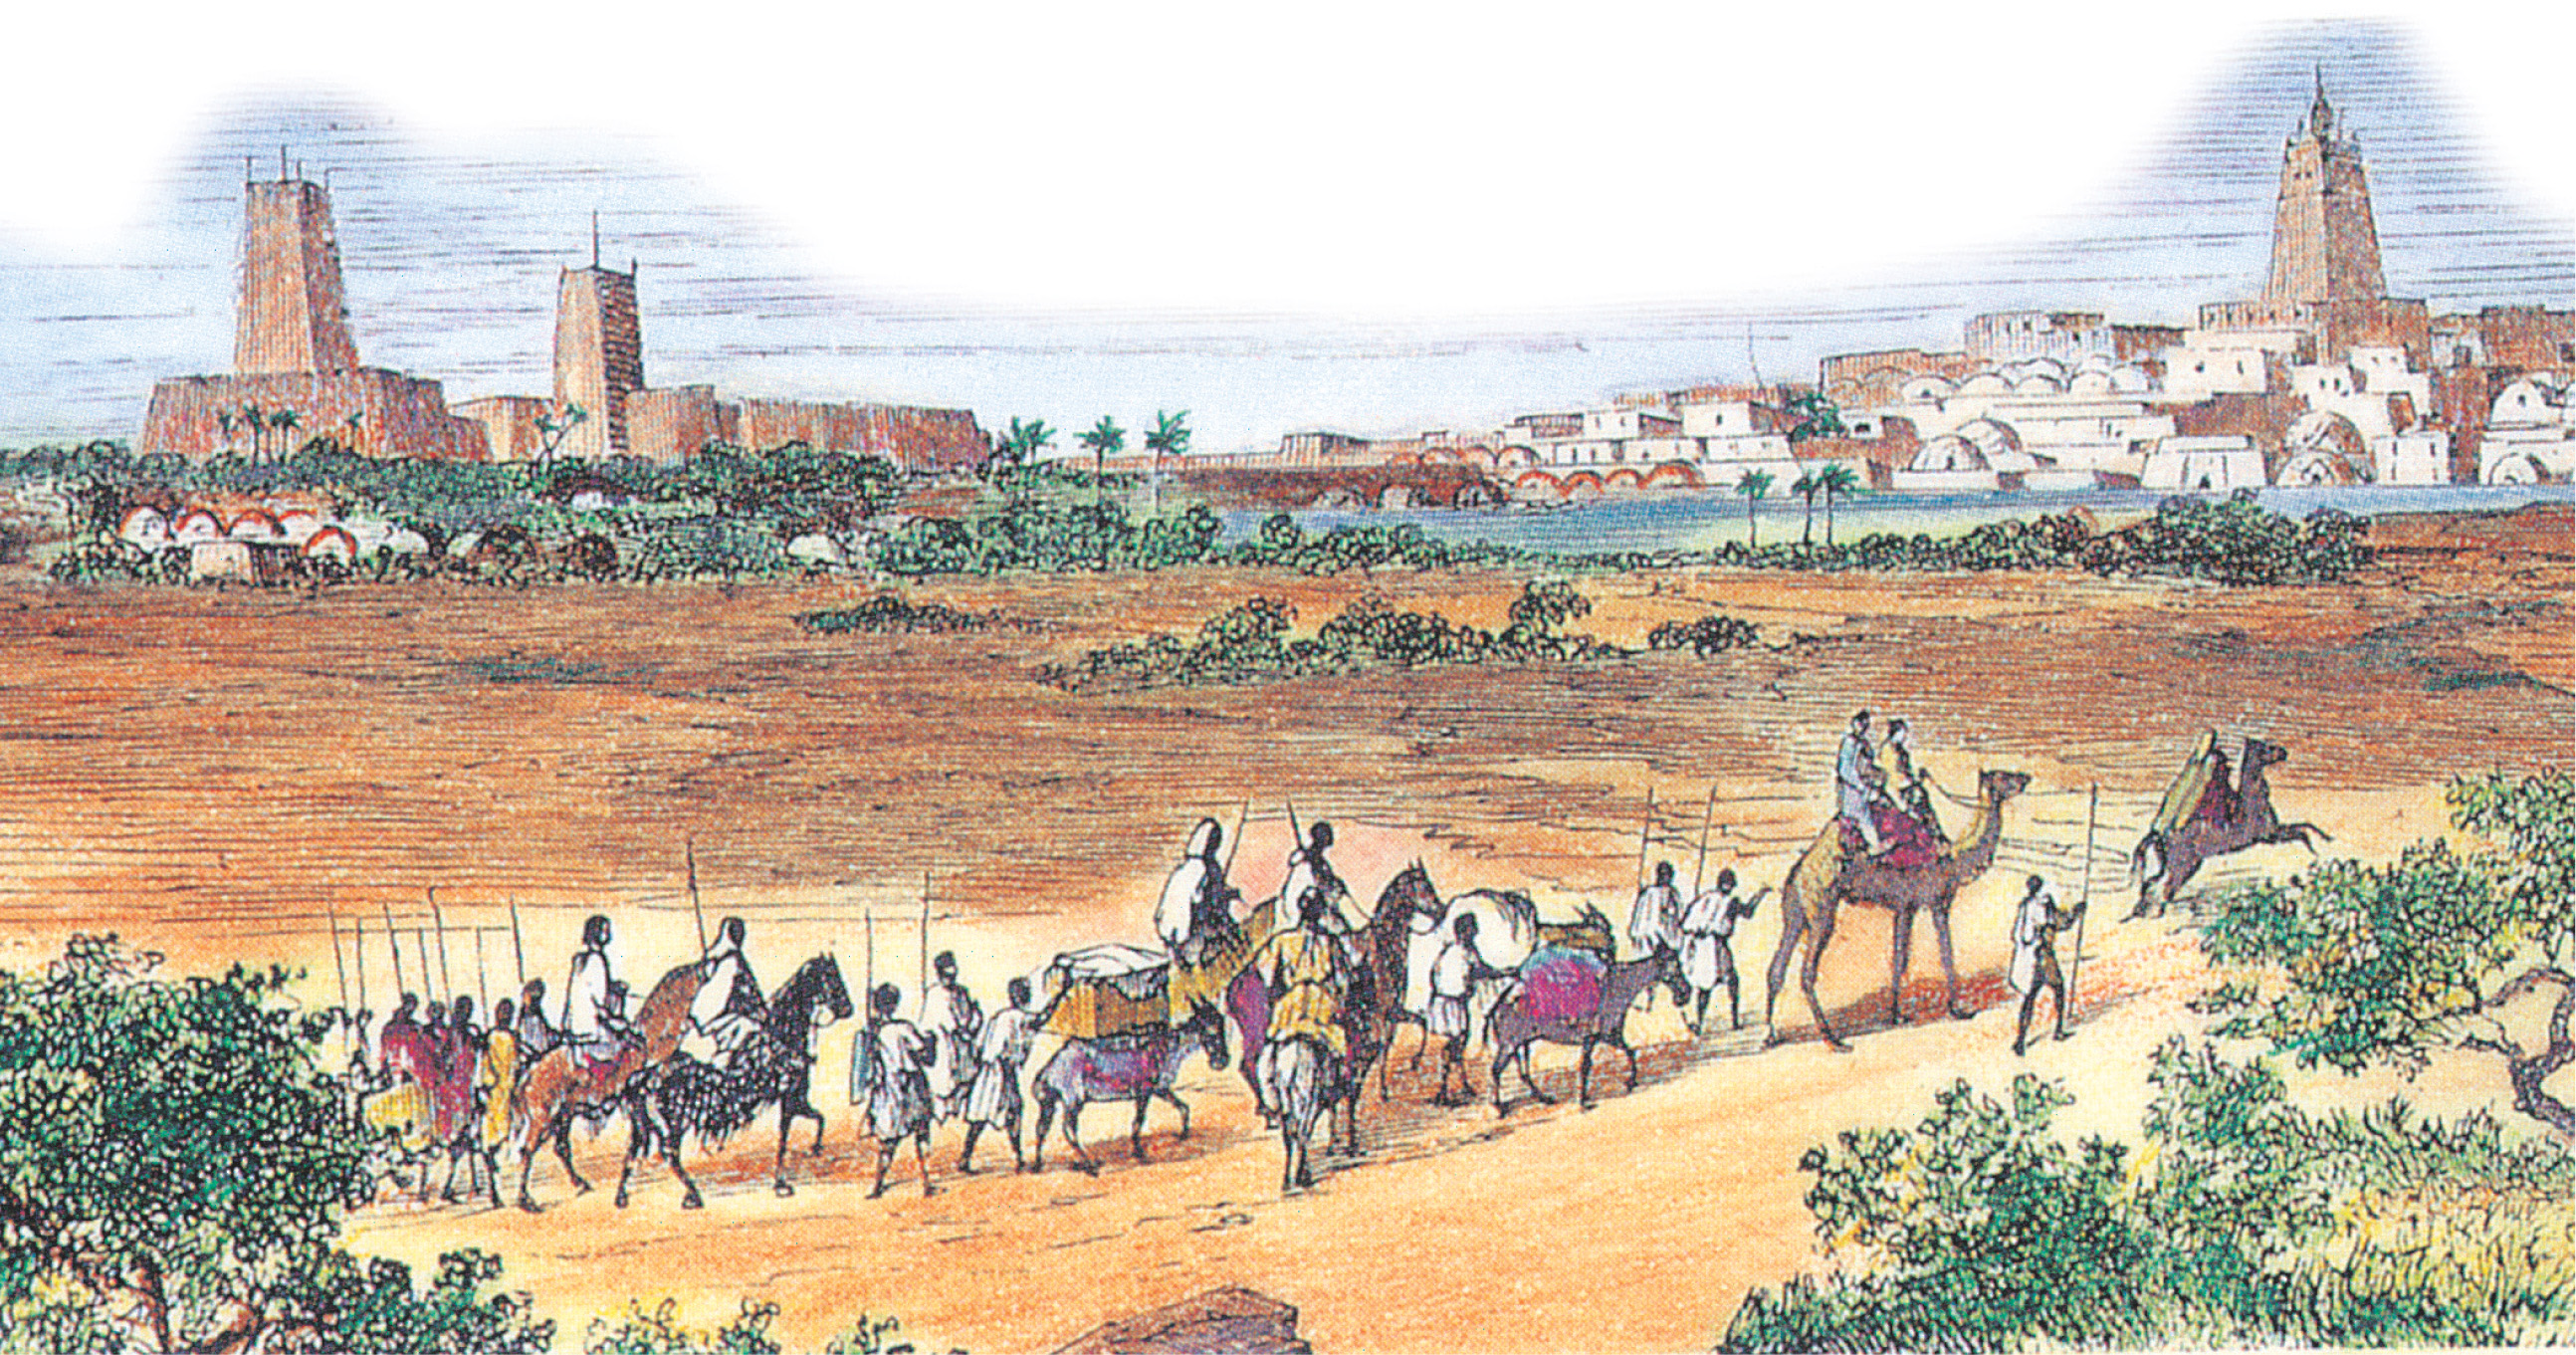 Illustration depicts a desert caravan of people, camels and horses approaching a city built beside water.